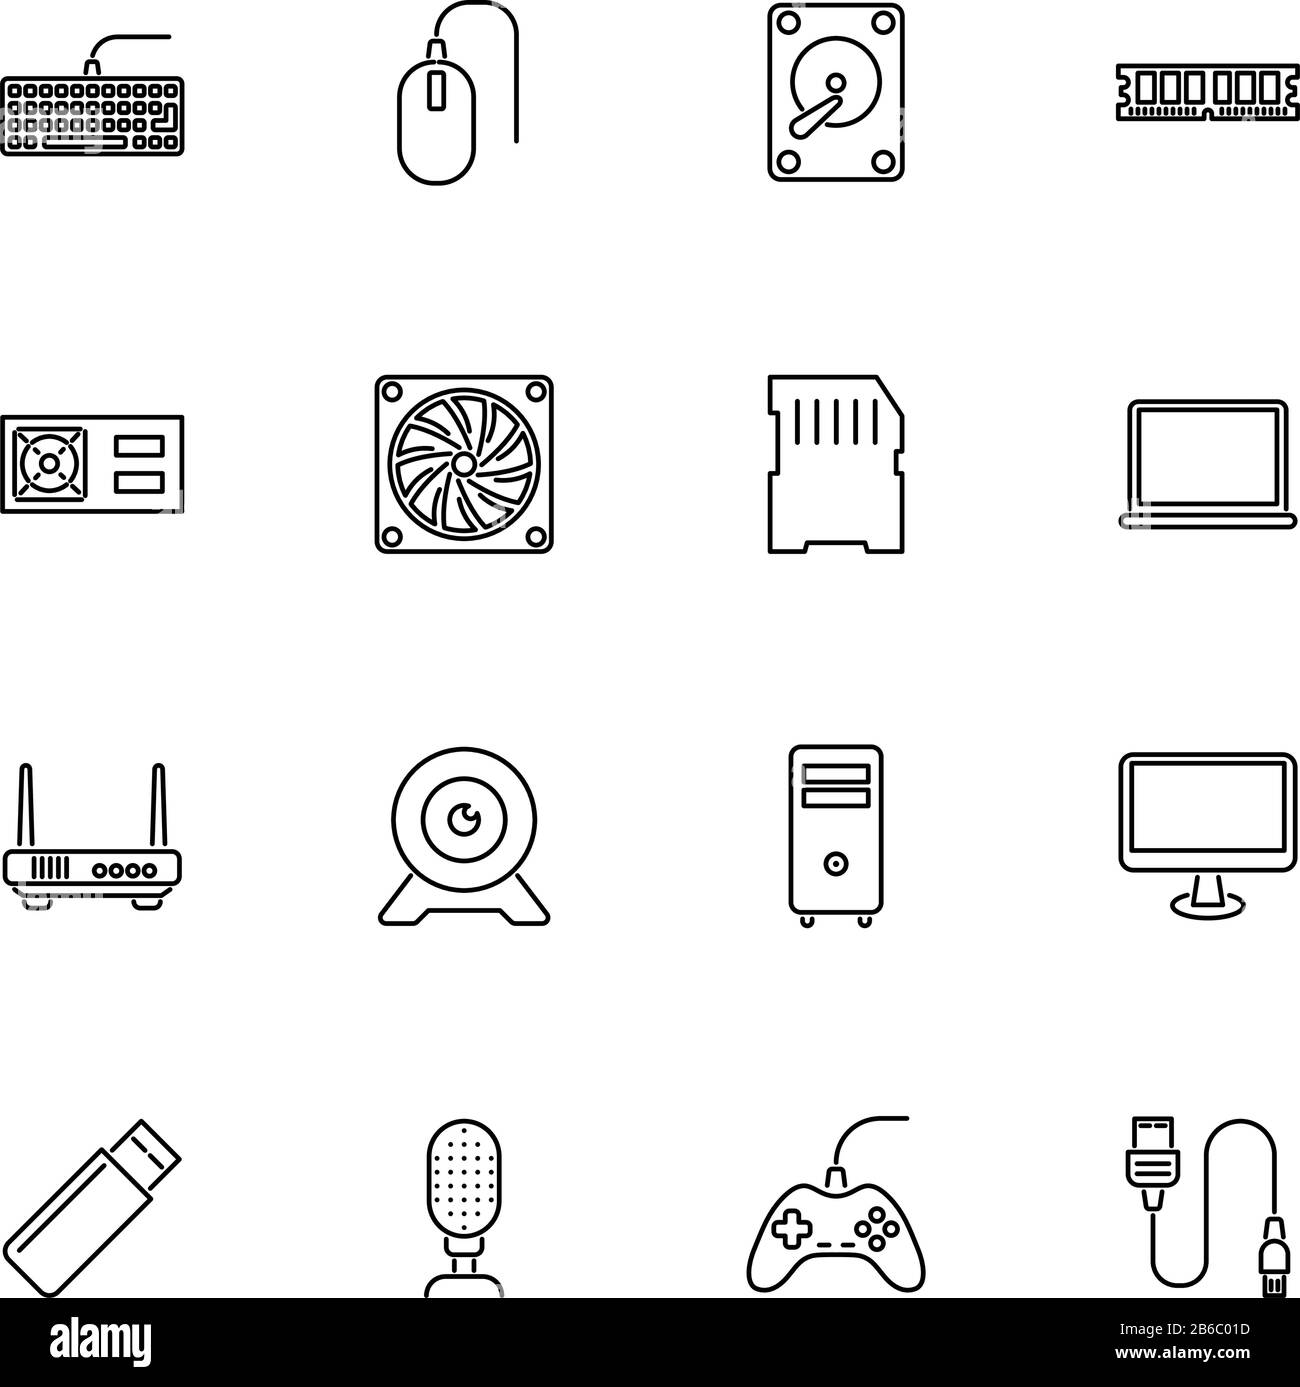 Hardware, Computer Parts outline icons set - Black symbol on white background. Hardware, Computer Parts Simple Illustration Symbol - lined simplicity Stock Vector